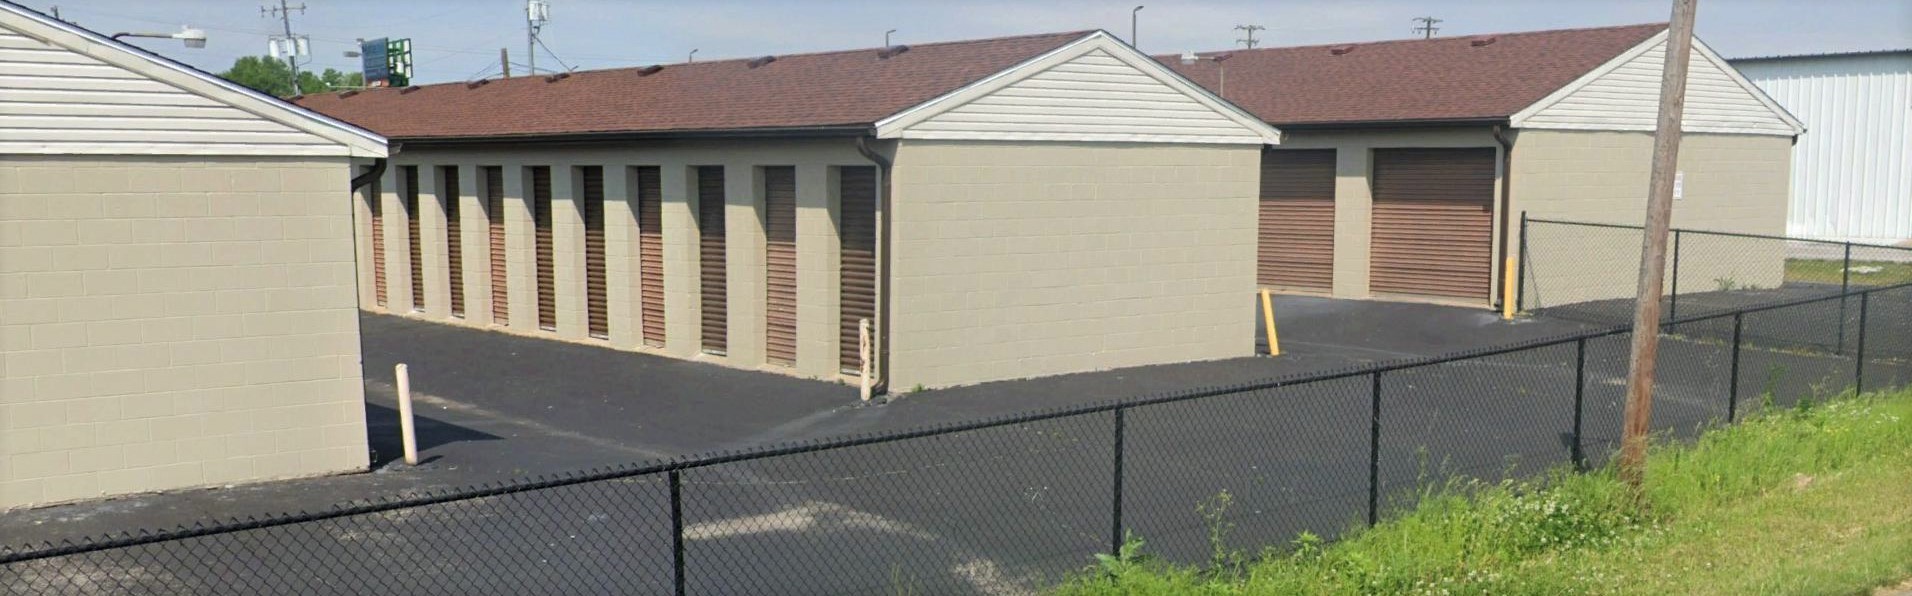 Trusted Choice Self Storage in Hopkinsville, KY